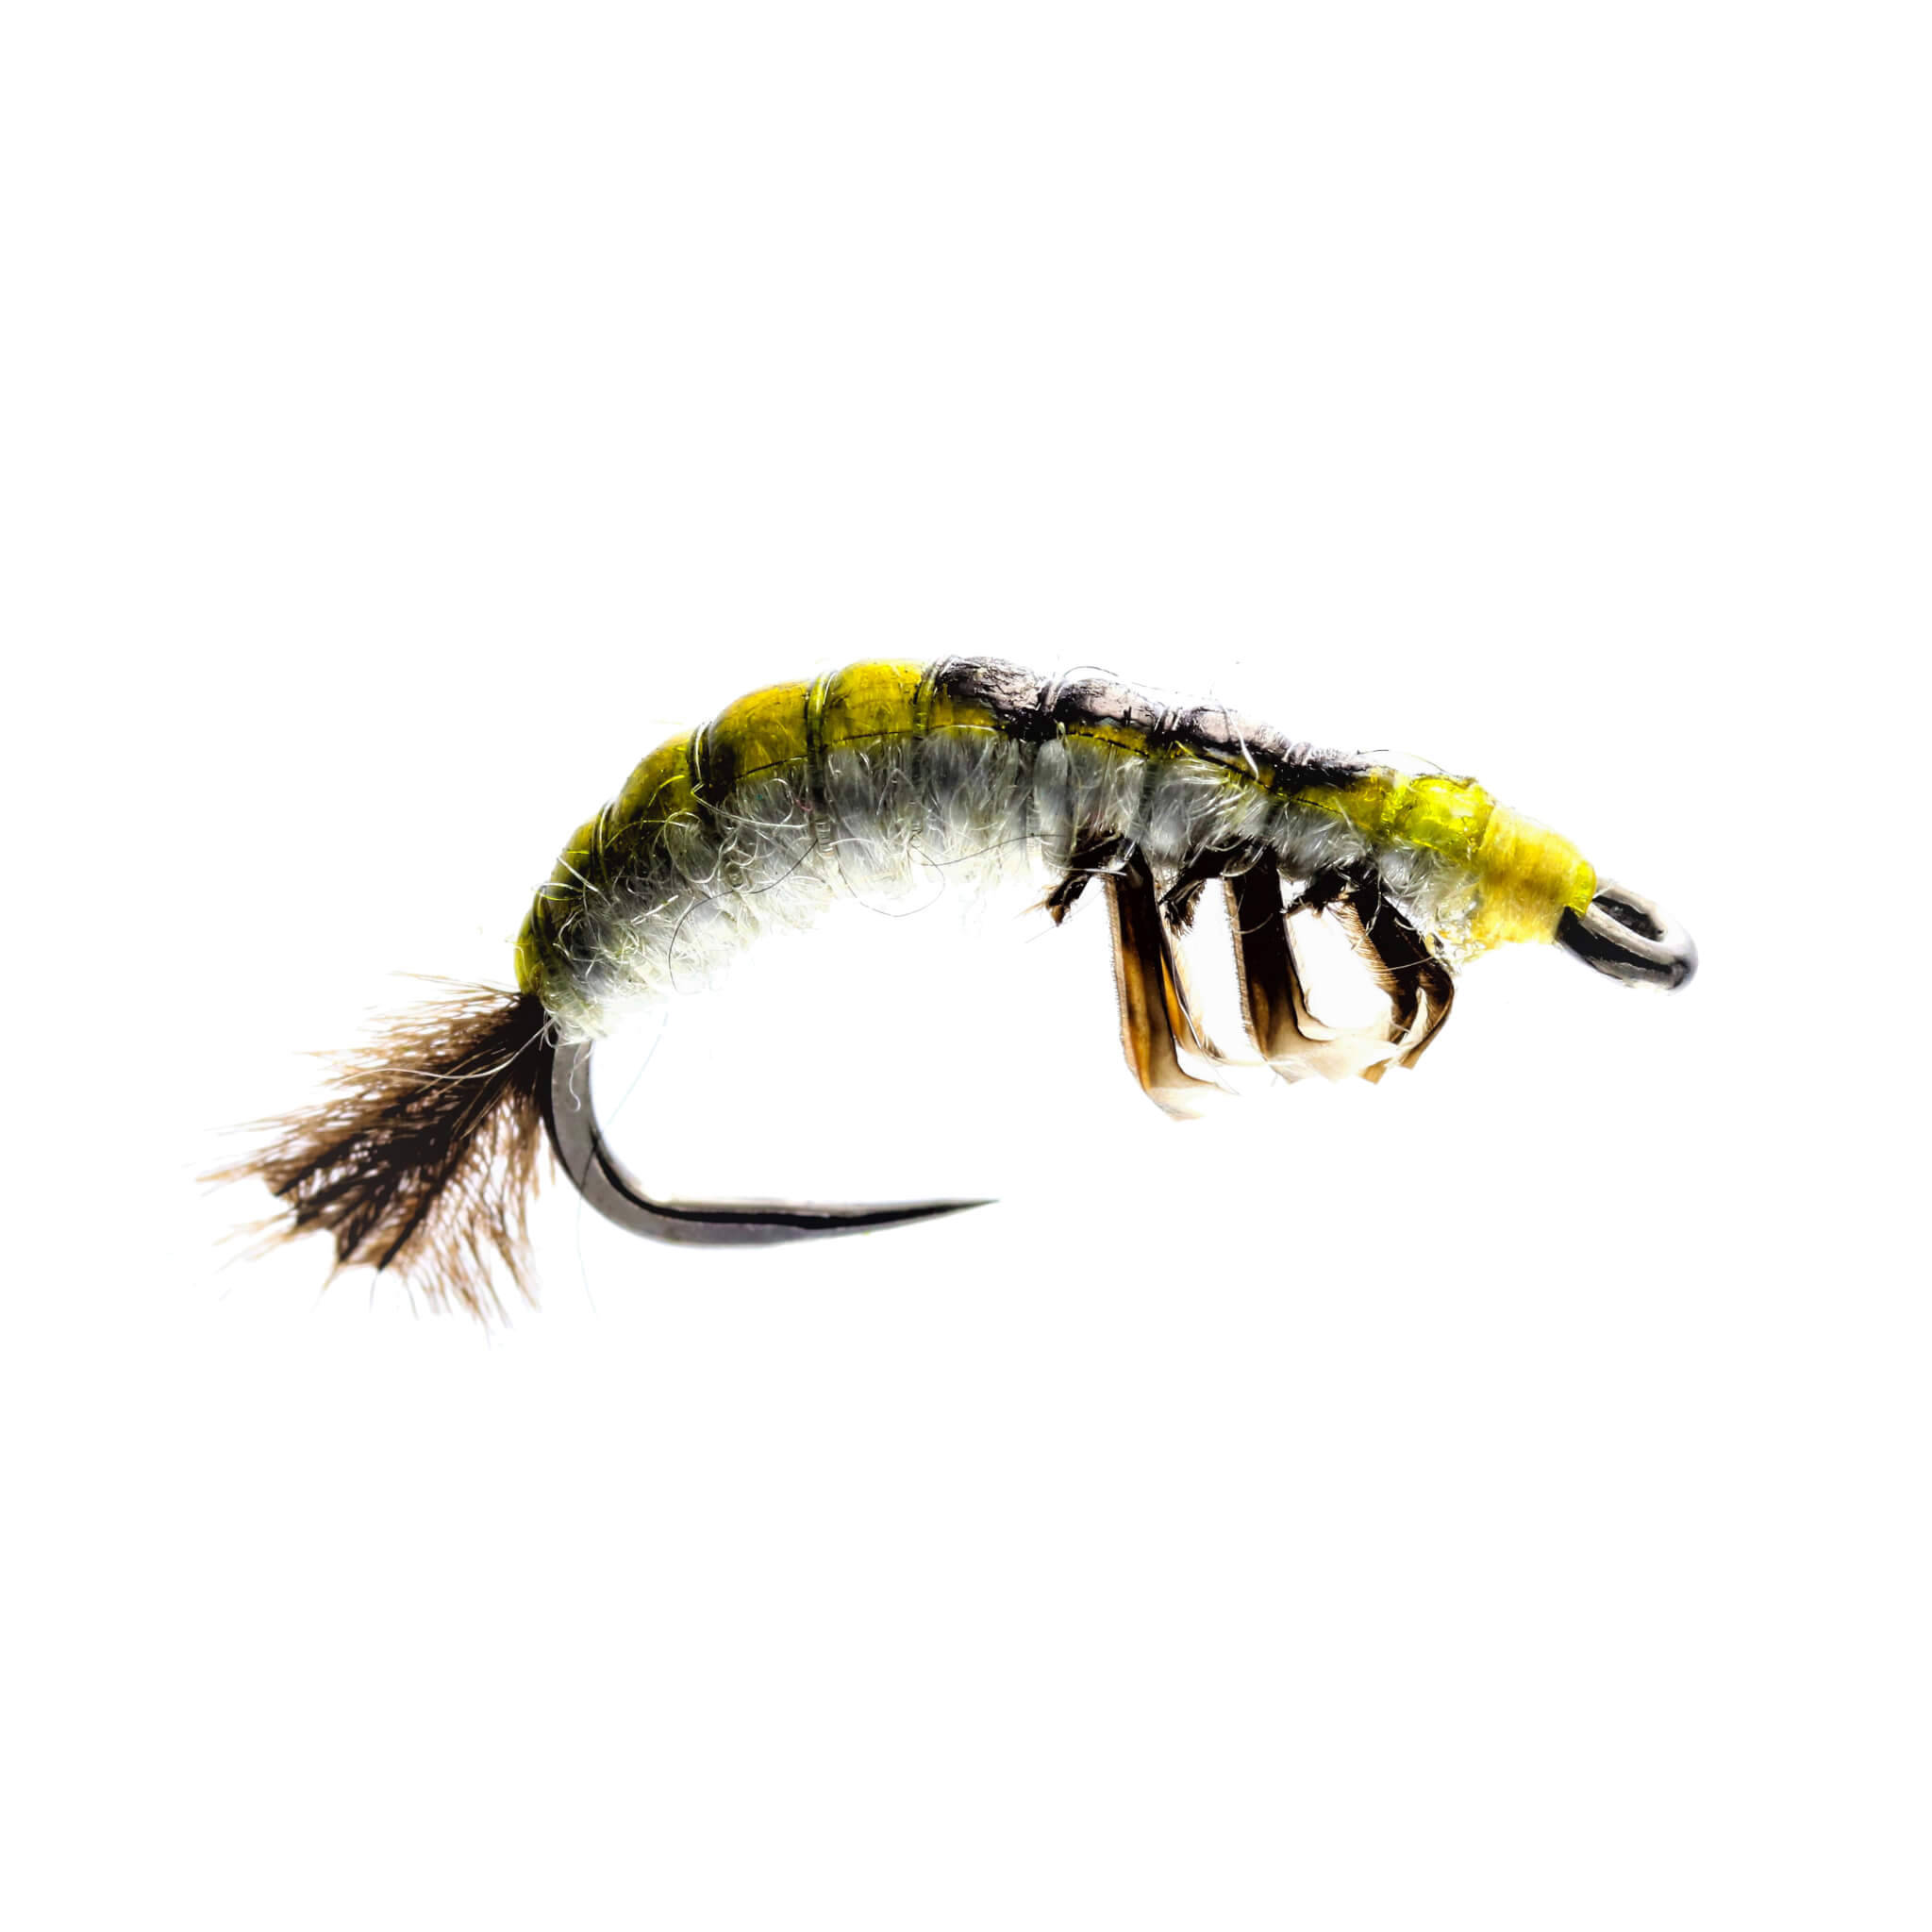 Weighted Hydropsyche Larva Bodies with Hooks - 6 pcs - FrostyFly